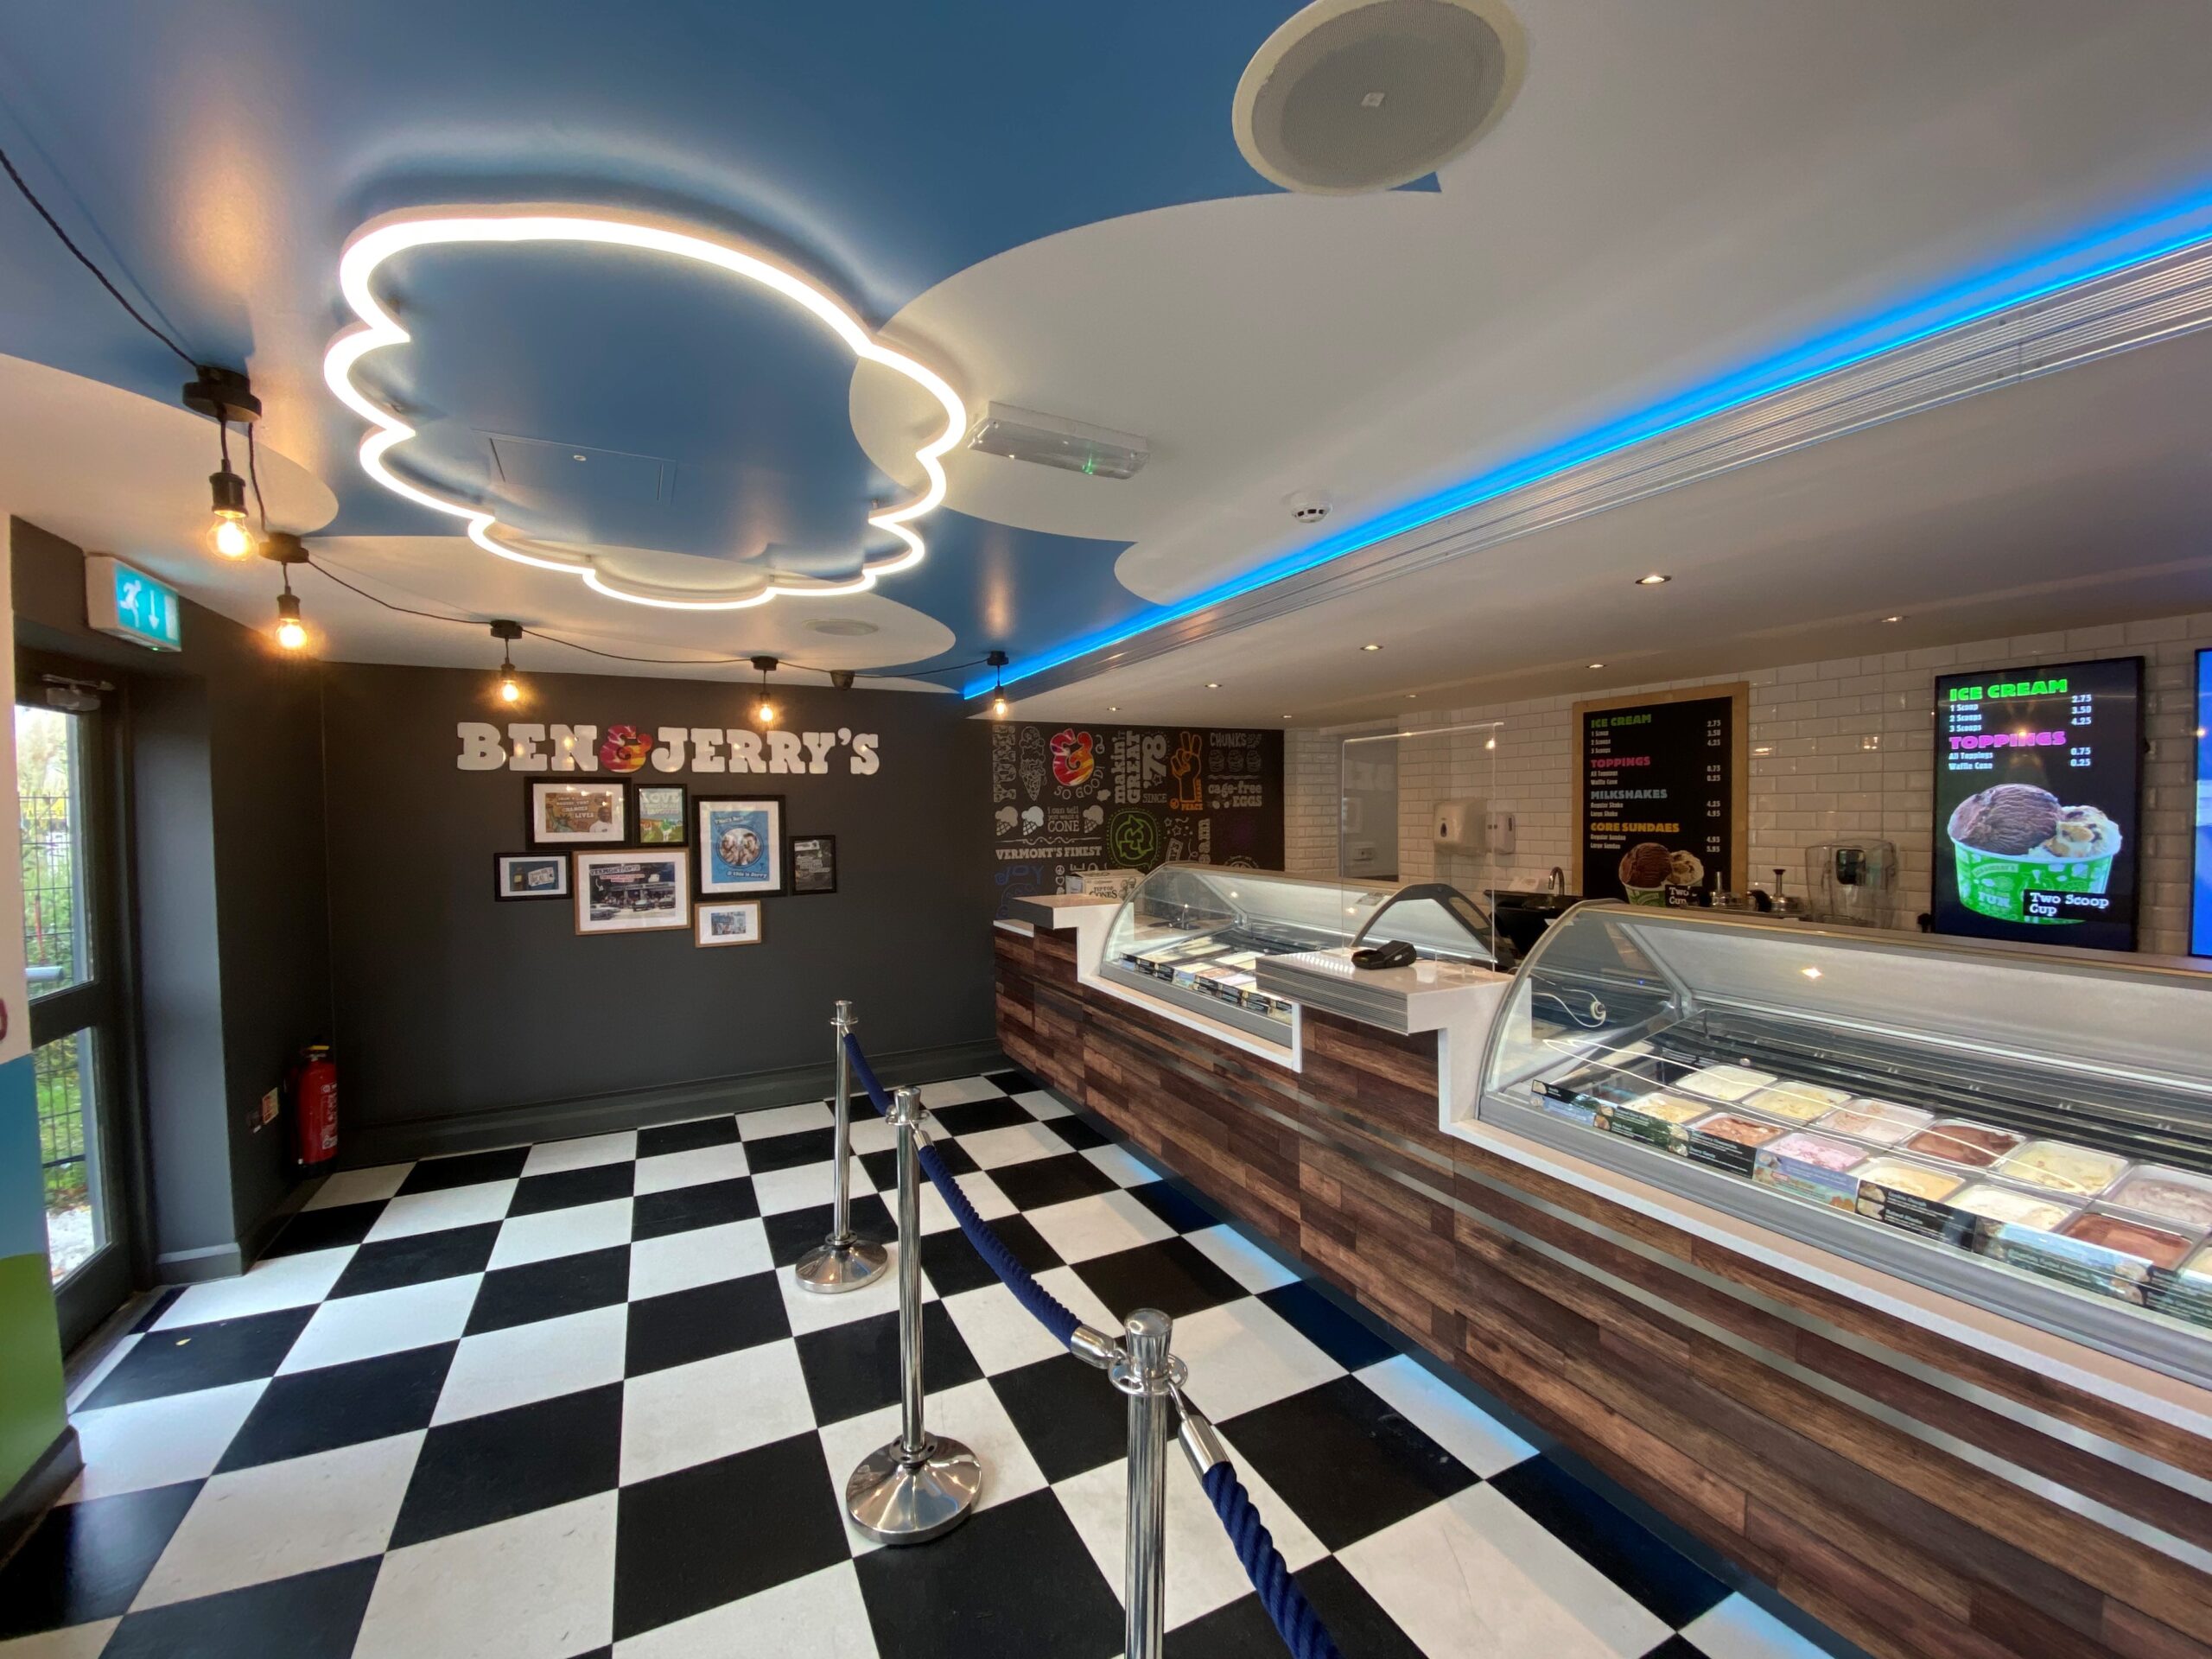 Ben and Jerry's Thorpe Park scoop shop interiors